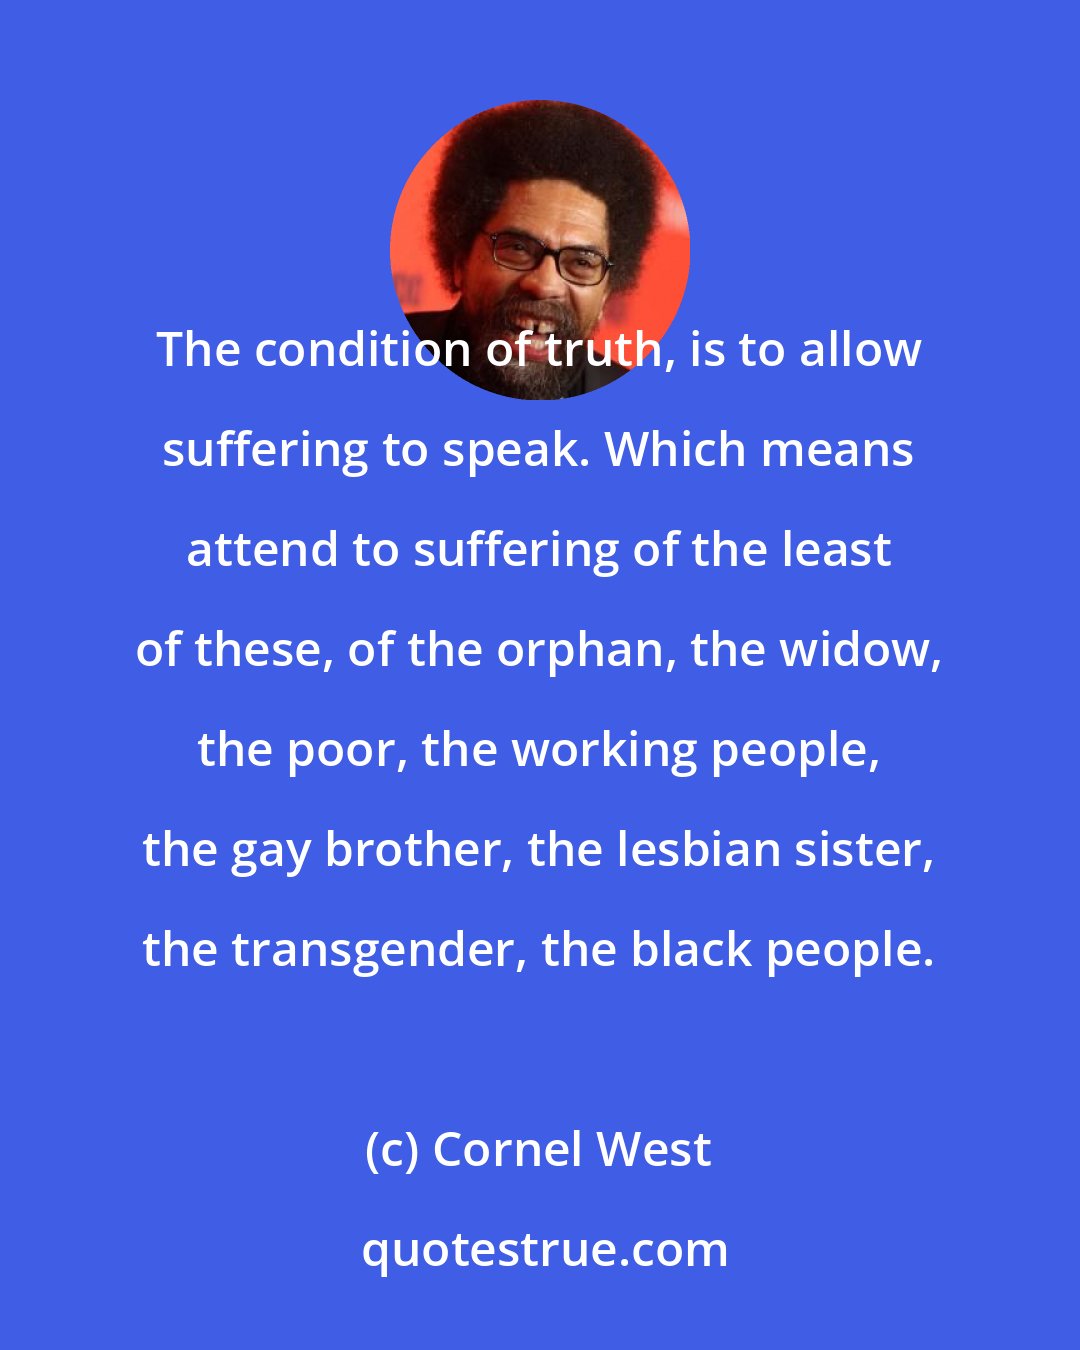 Cornel West: The condition of truth, is to allow suffering to speak. Which means attend to suffering of the least of these, of the orphan, the widow, the poor, the working people, the gay brother, the lesbian sister, the transgender, the black people.